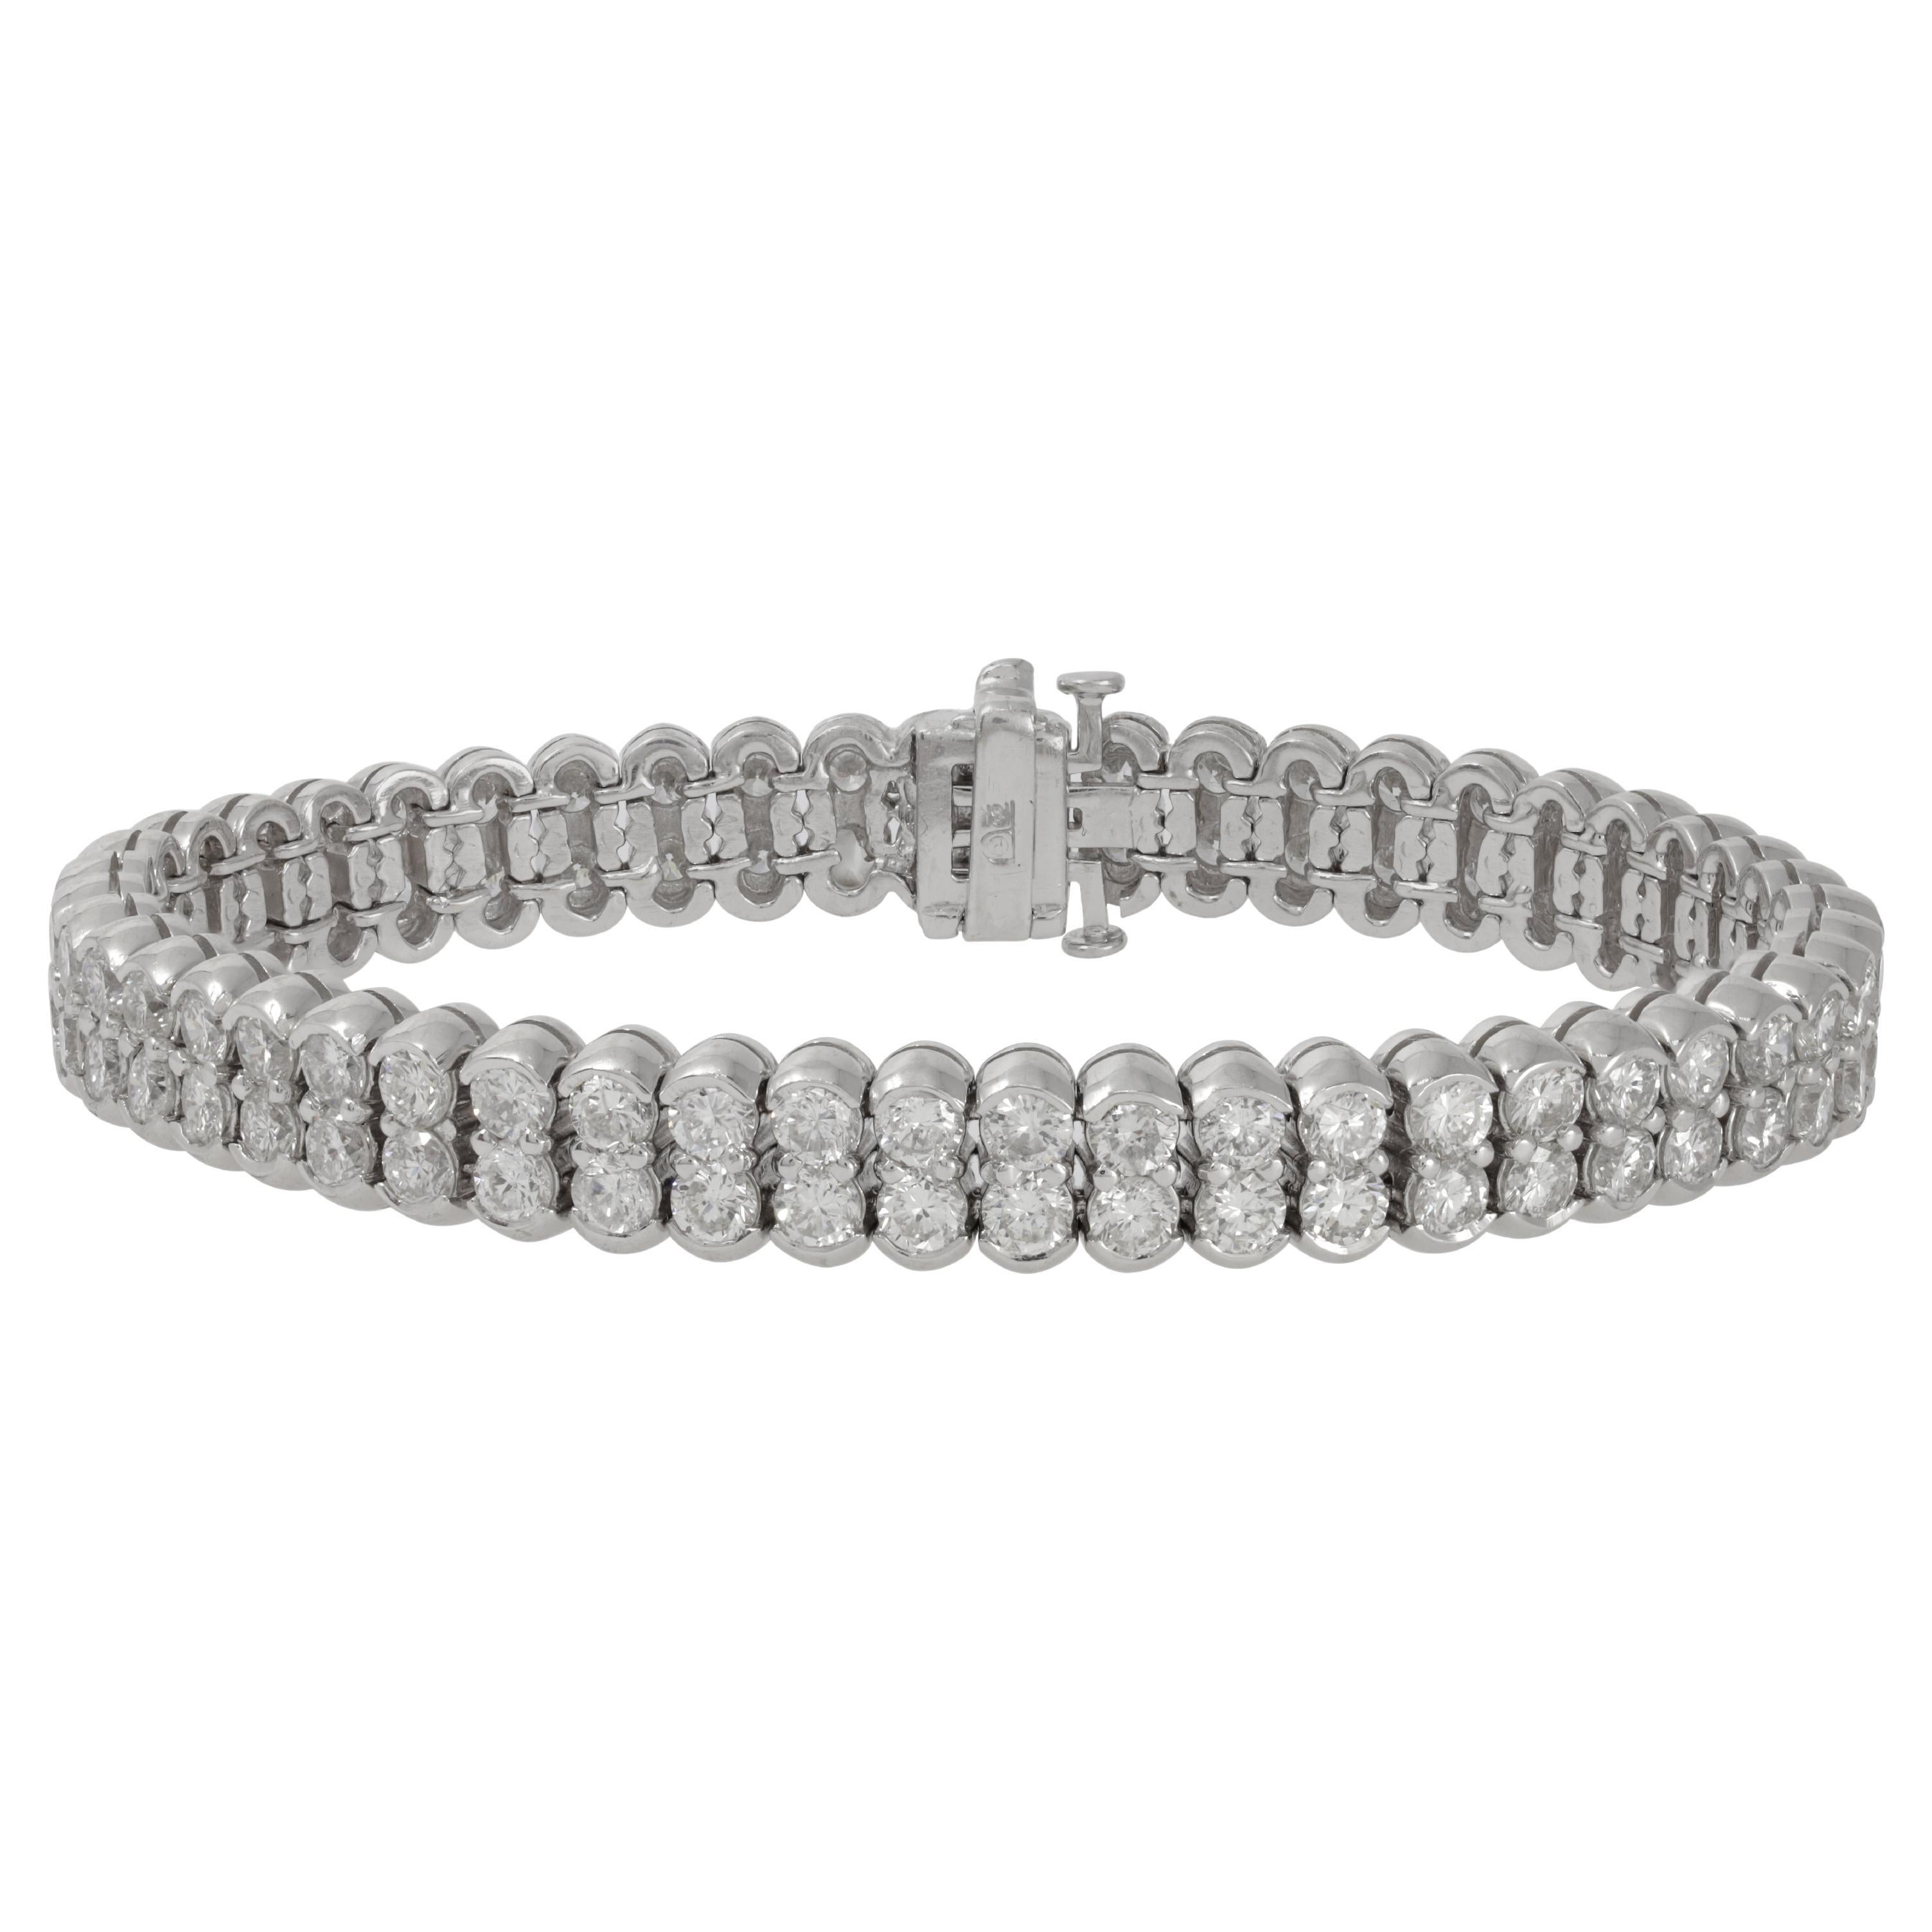 DIANA M. 18kt white gold bracelet featuring 2 rows of 11.70 cts round diamonds For Sale